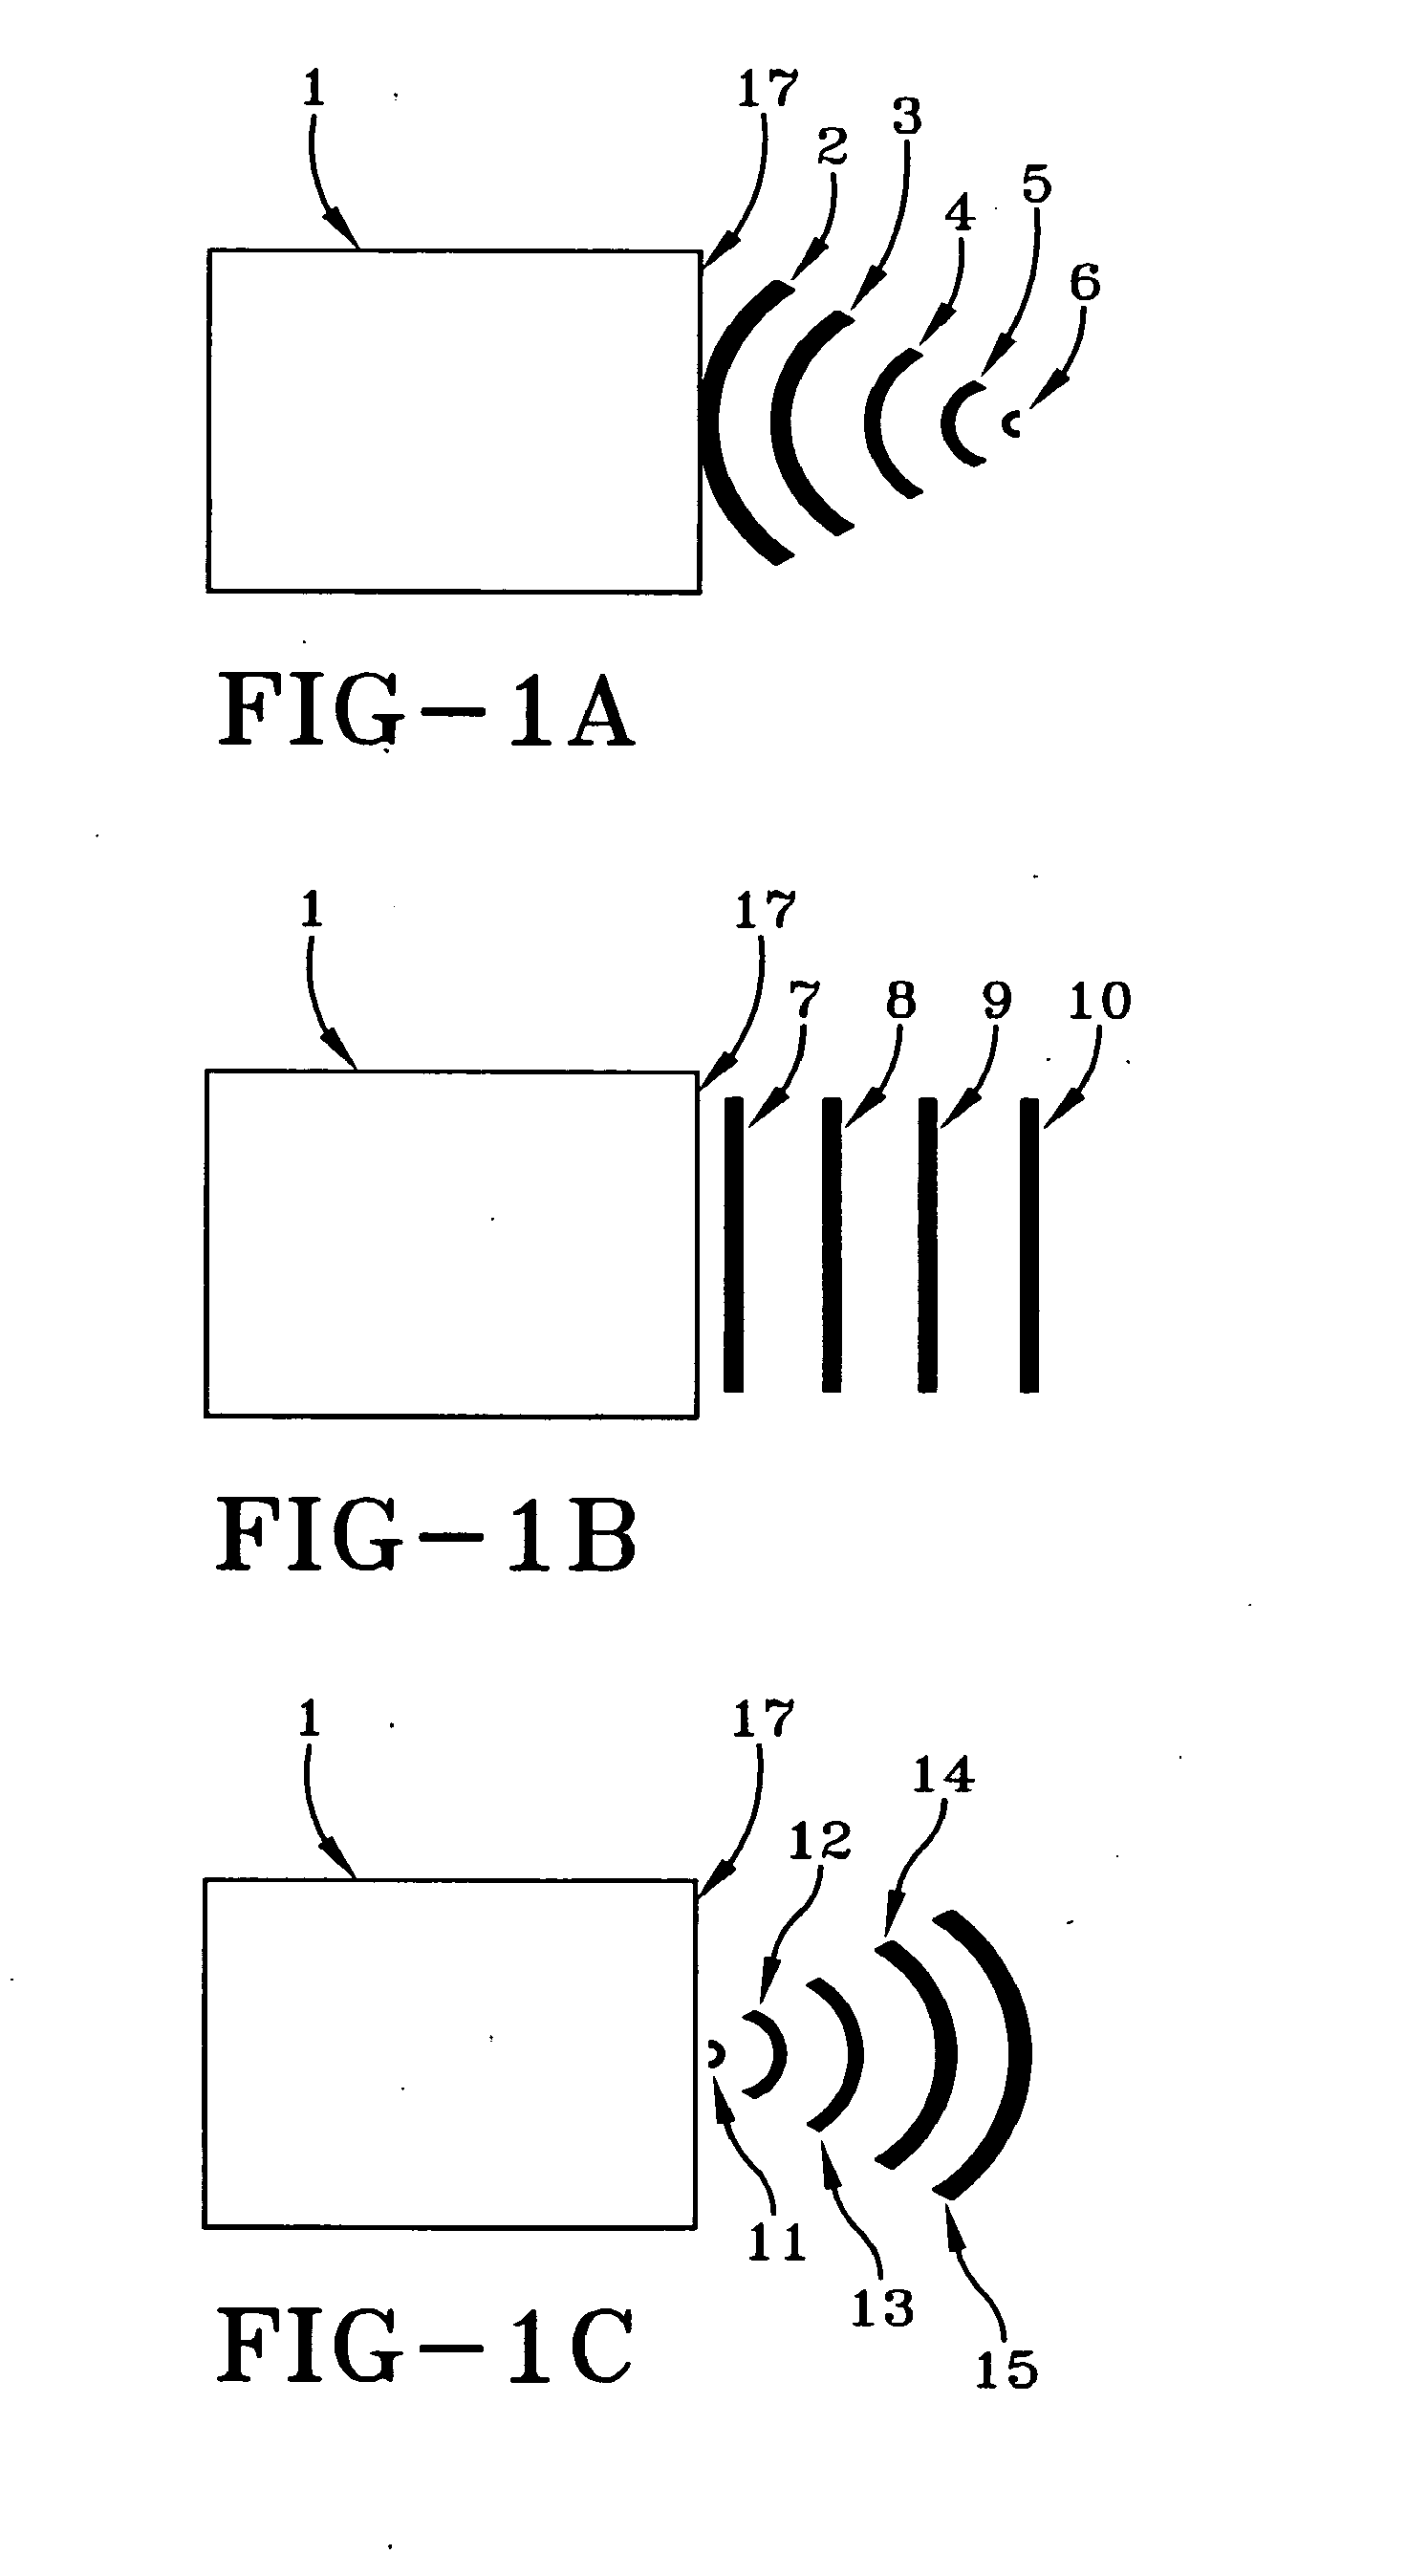 Method of acoustic shock wave treatments for complications associated with surgical mesh implants